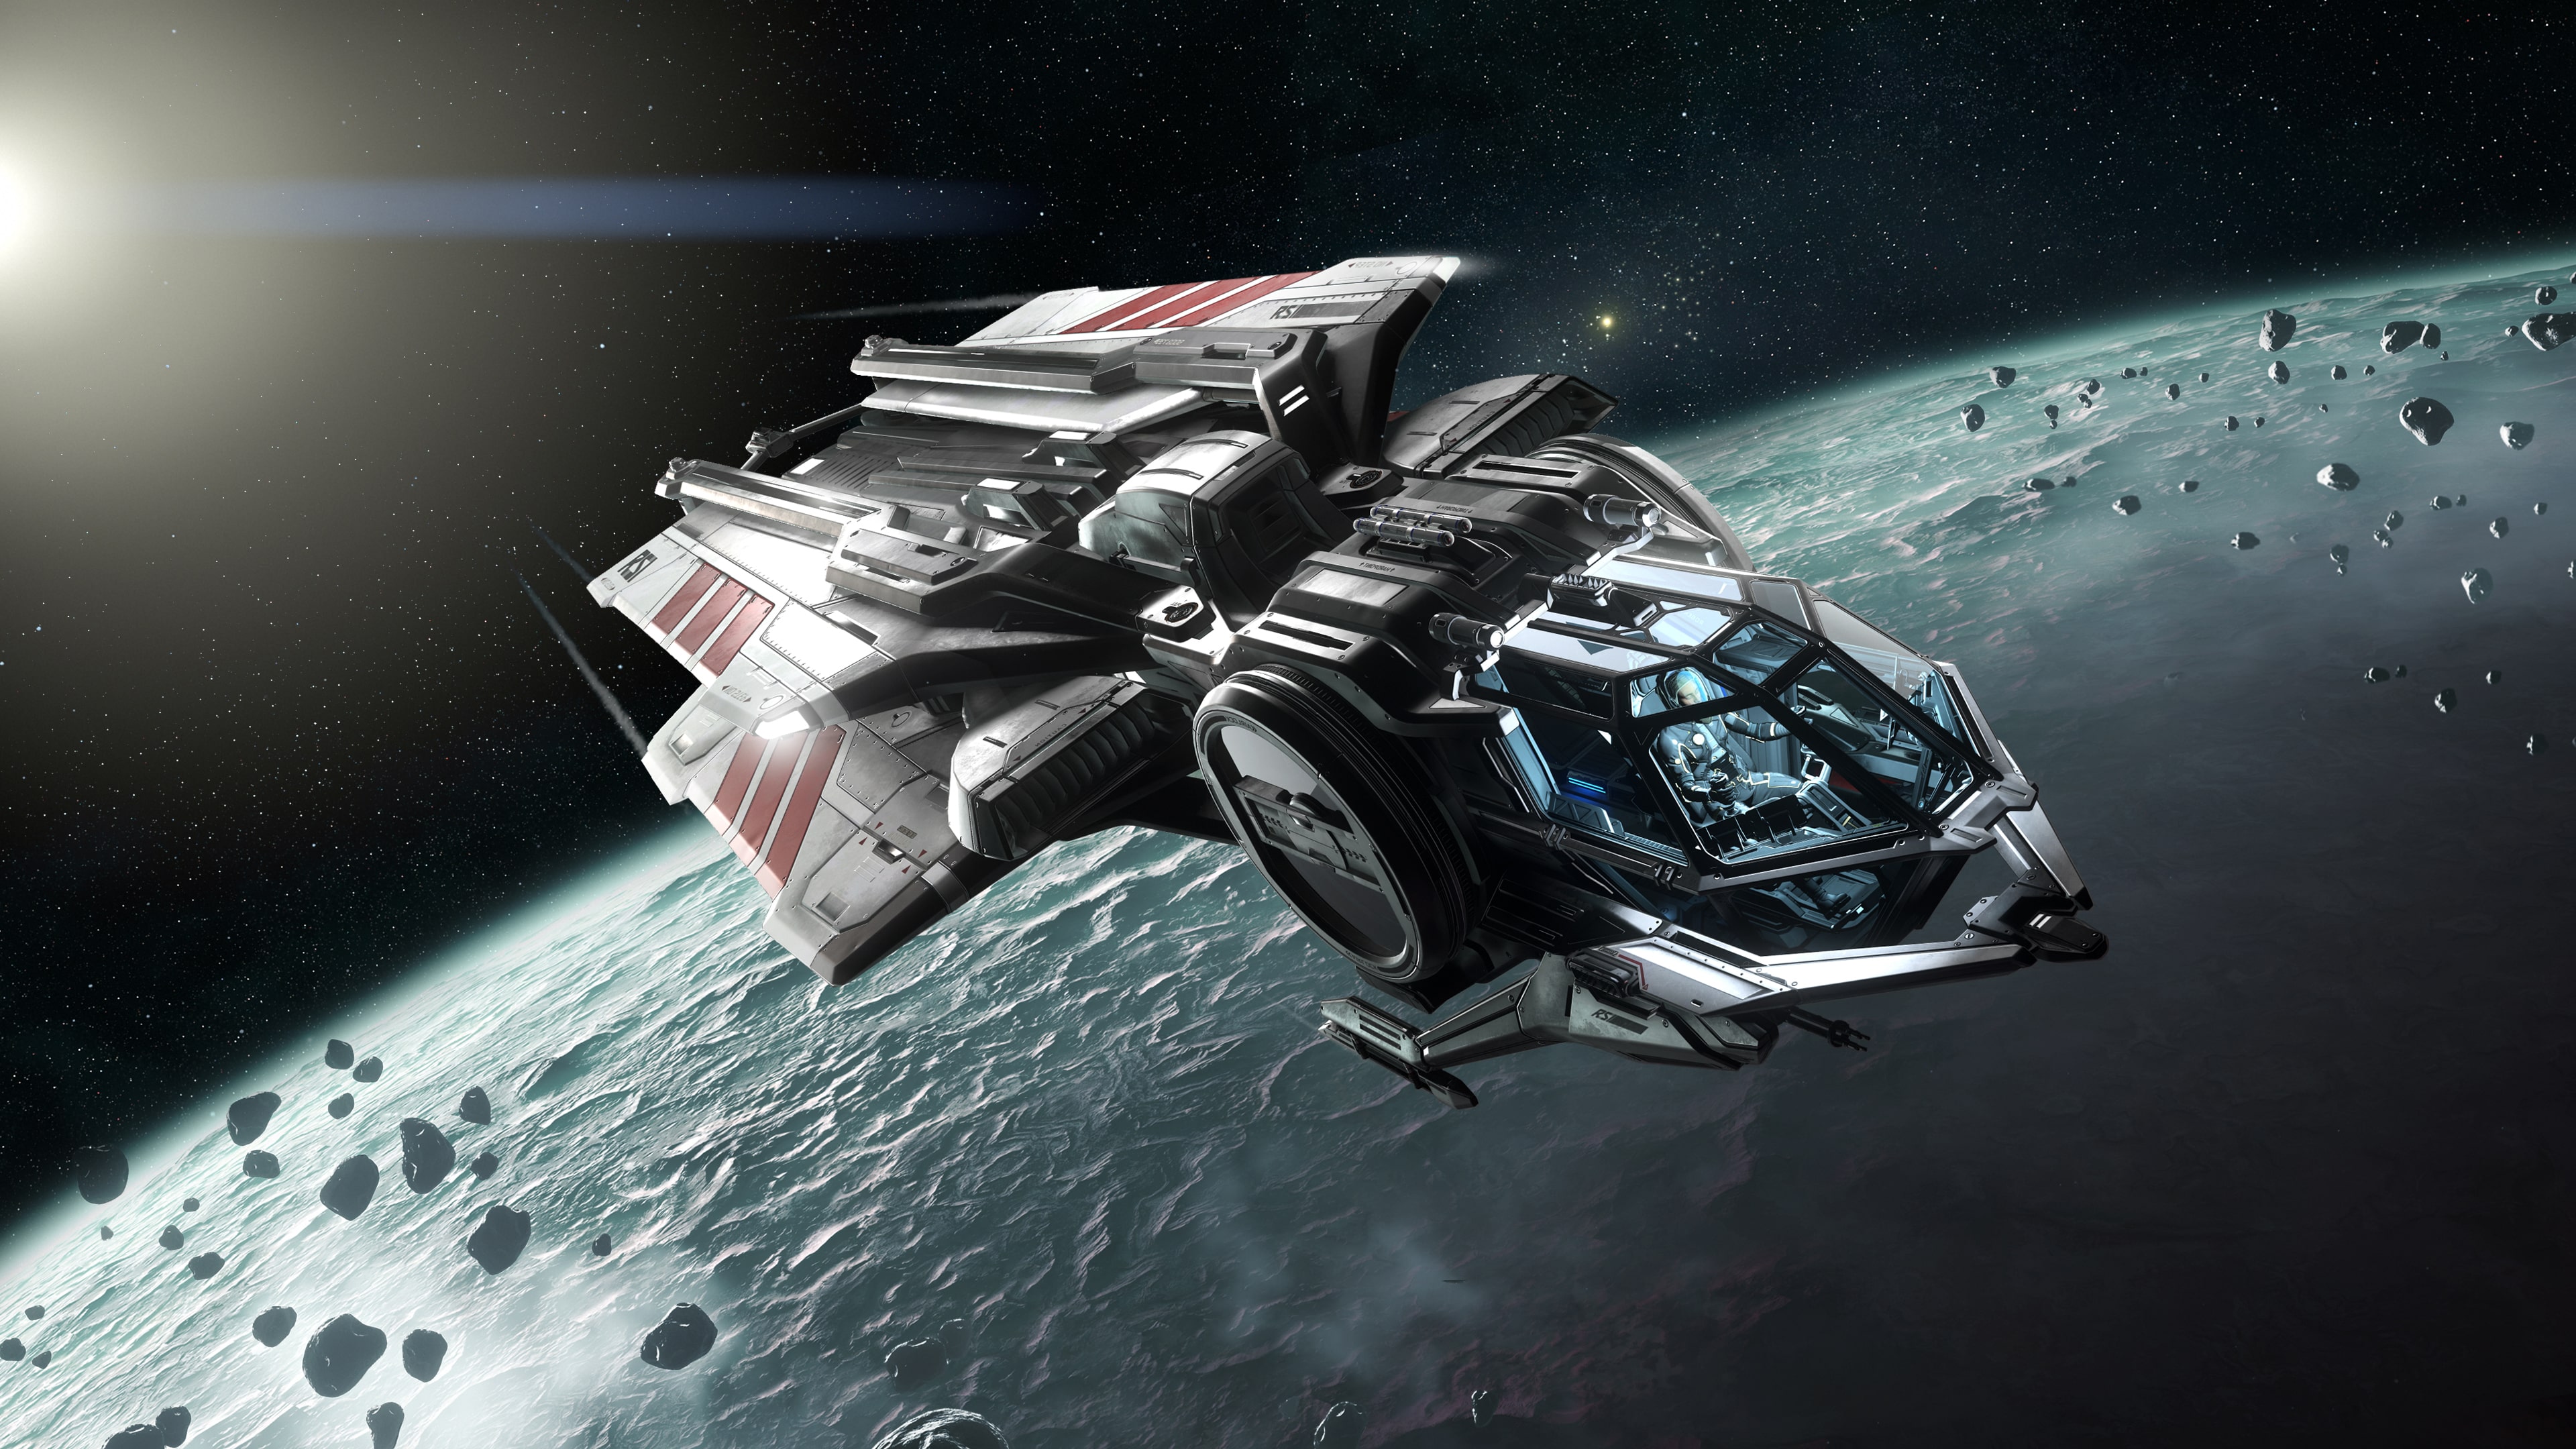 beslag inden for Kirsebær Star Citizen developers received more than $500 million from users to  develop the game | gagadget.com